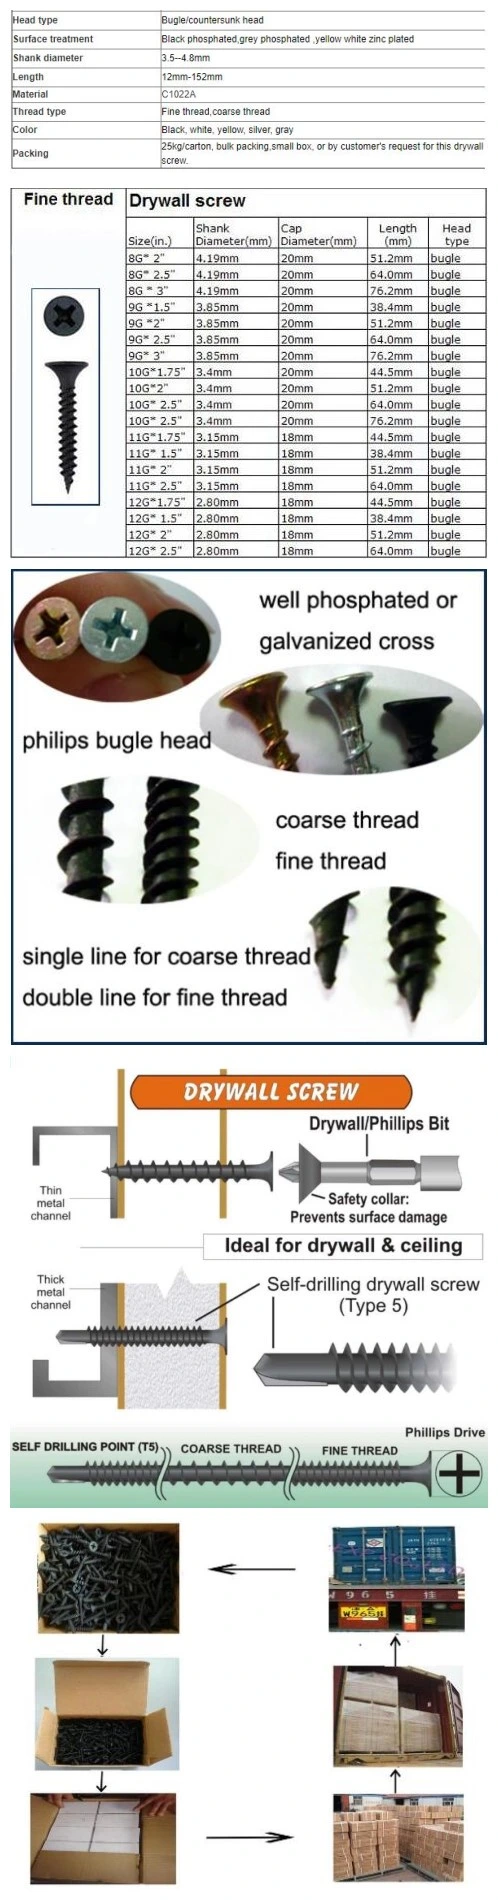 for Wood and Metal Black Phosphated Drywall Screw, Gypsum Board Self Tapping Drywall Screw